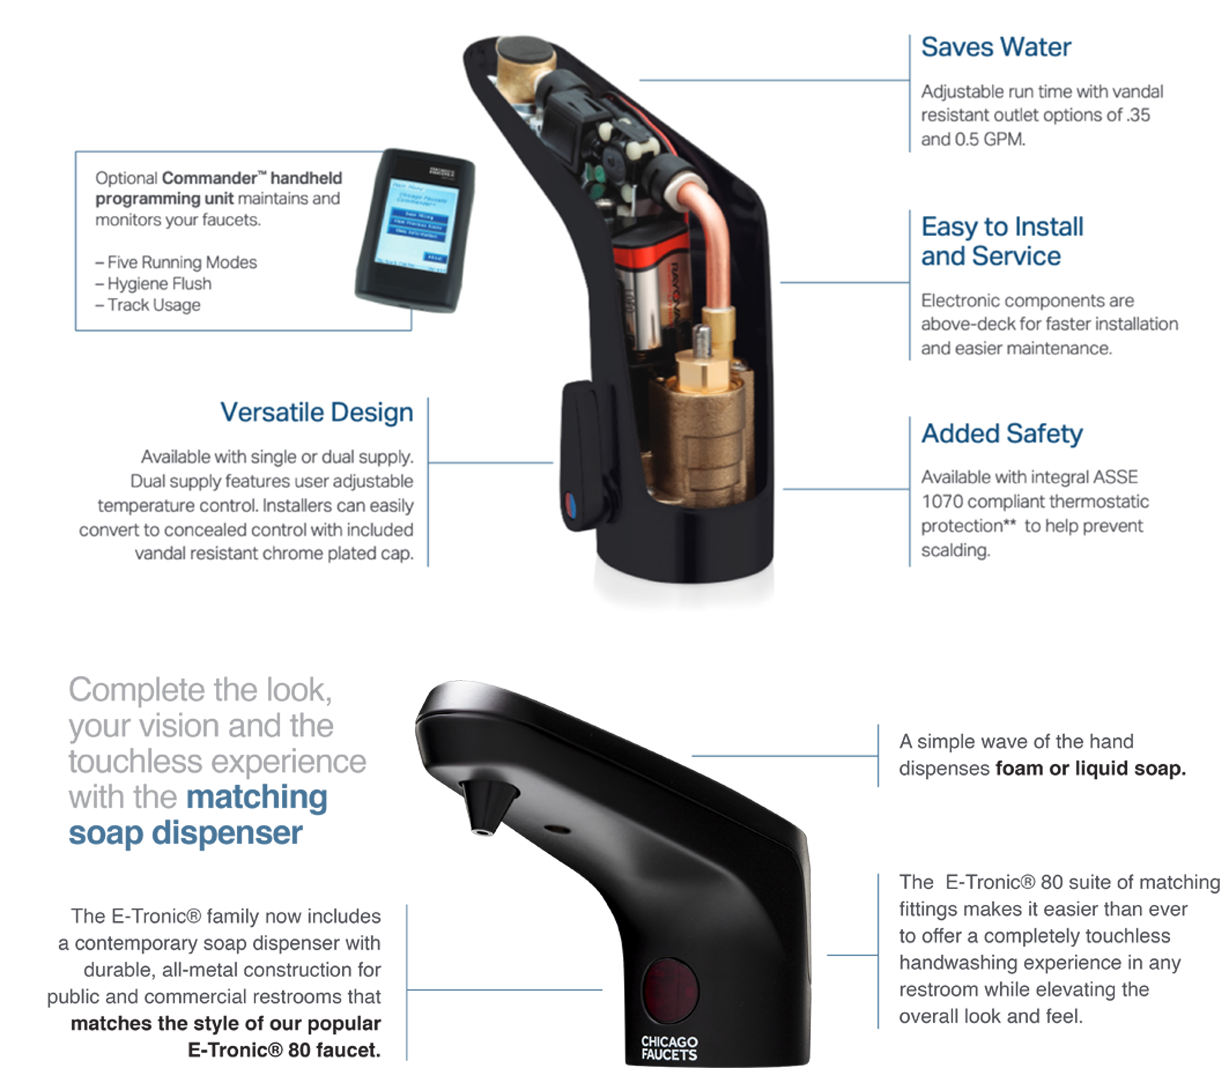 A look inside E-Tronic® 80 touchless faucet and soap dispenser 